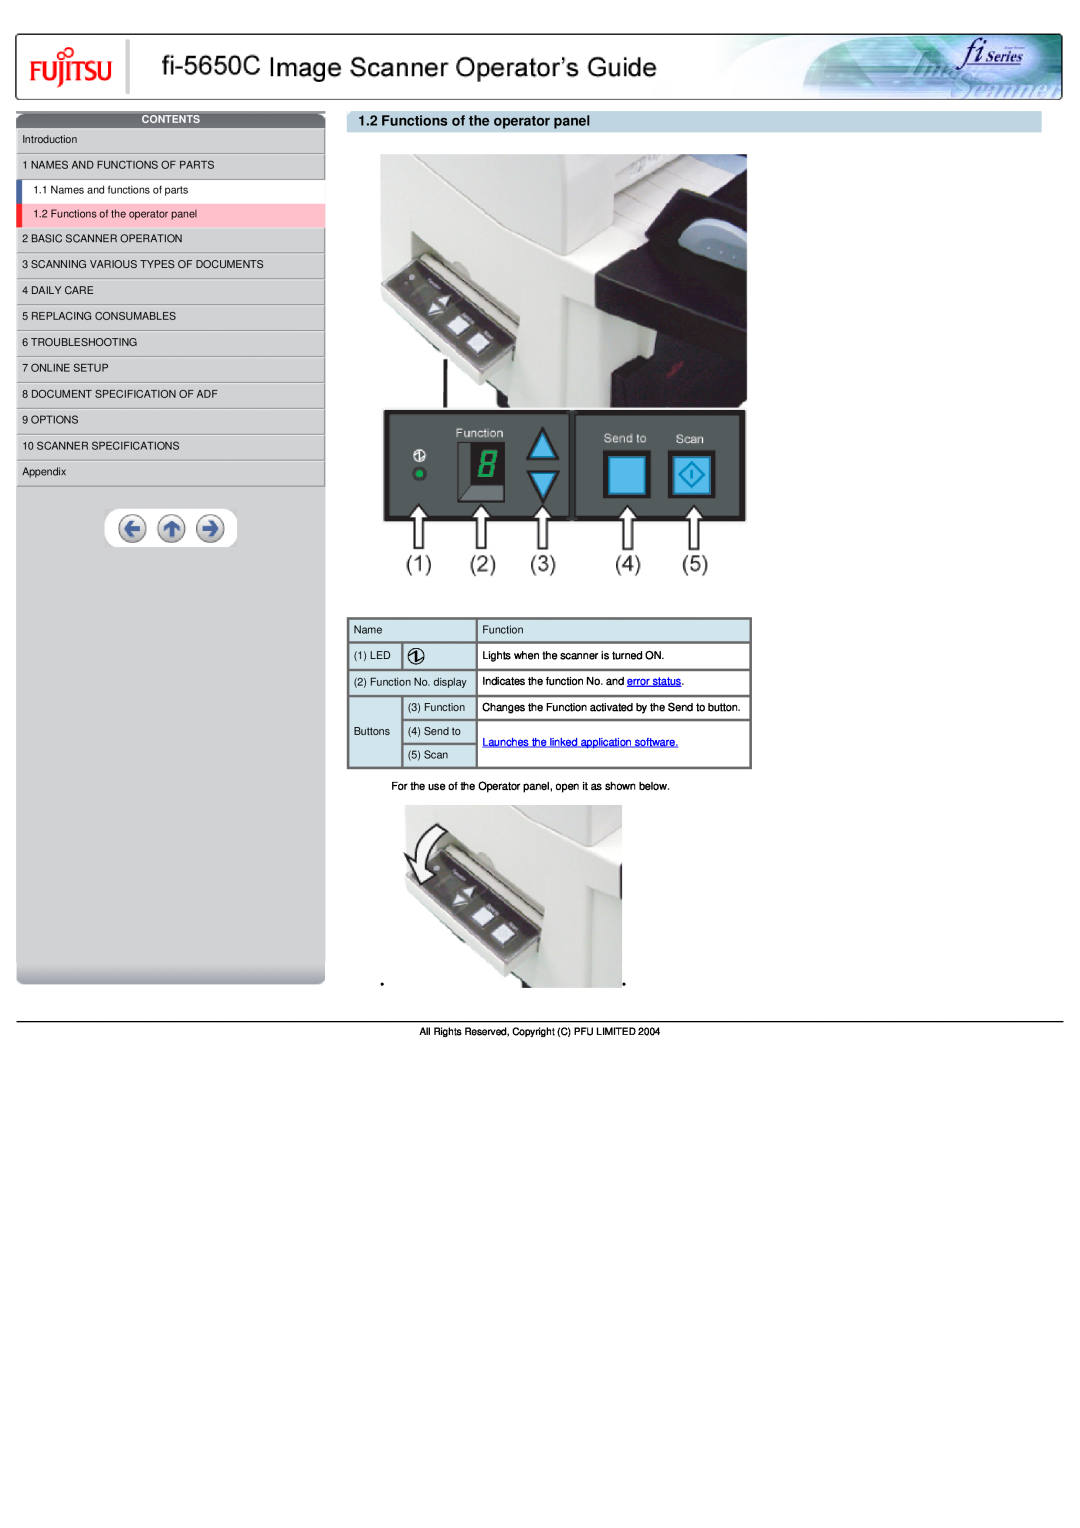 Fujitsu fi-5650C specifications Functions of the operator panel, Contents, Launches the linked application software 